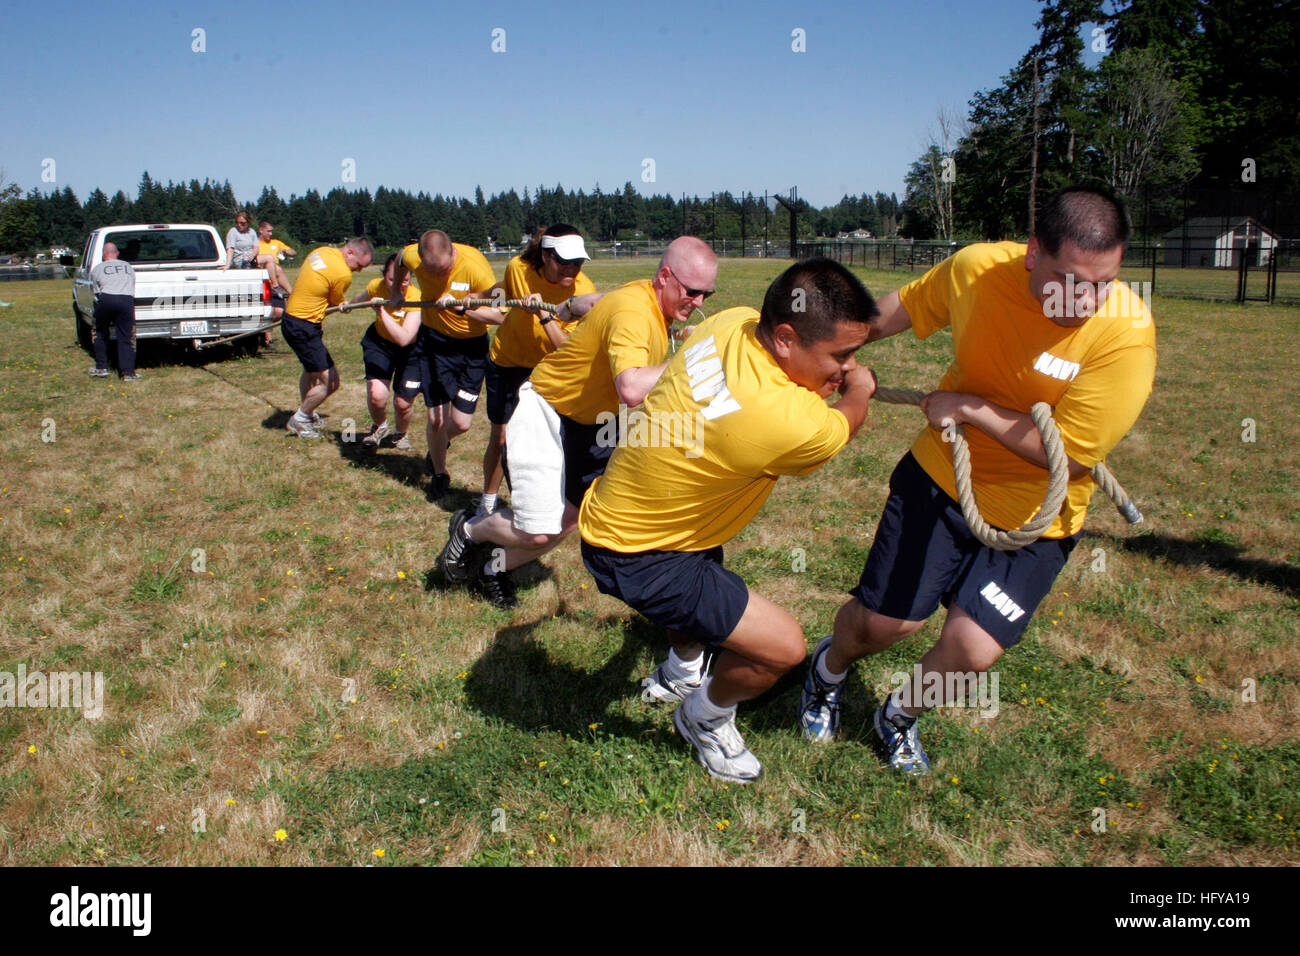 100708-N-2304O-058 BREMERTON, Wash. (July 8, 2010) Naval Hospital Bremerton (NHB) Sailors participate in a truck pull competition after completing their weekly command physical training.  The competition involves teams pulling a pickup truck with 1,800 pounds of sandbags in the flatbed for 80 feet with command fitness leaders acting as safety observers, referees, and time keepers.  (U.S. Navy photo by Mass Communication Specialist 1st Class Charlemagne Obana/Released) US Navy 100708-N-2304O-058 Sailors compete during physical training Stock Photo